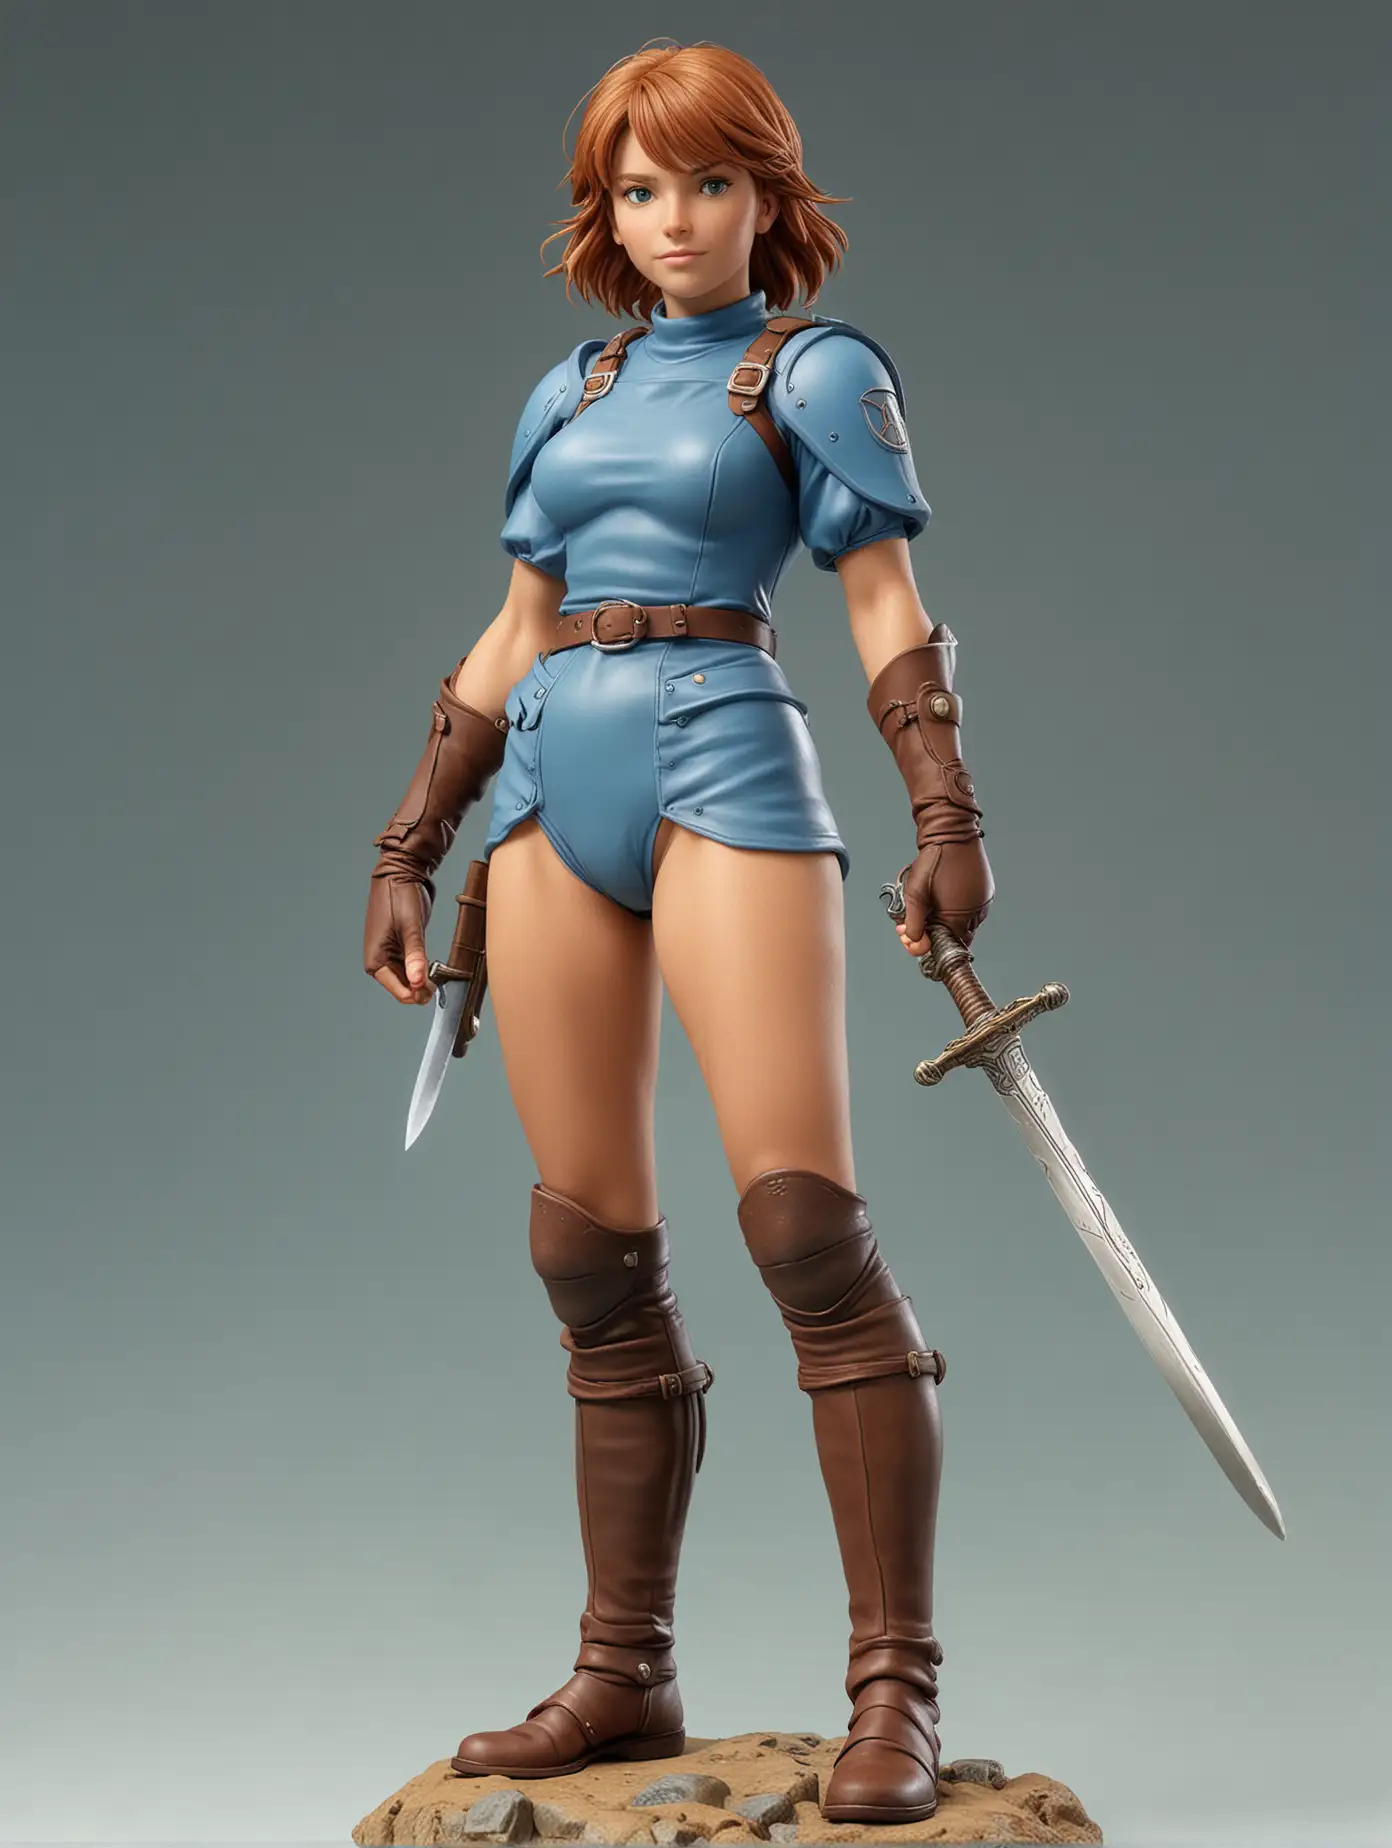 30 year old Nausicaa, highly realistic, legs, holding sword, full body